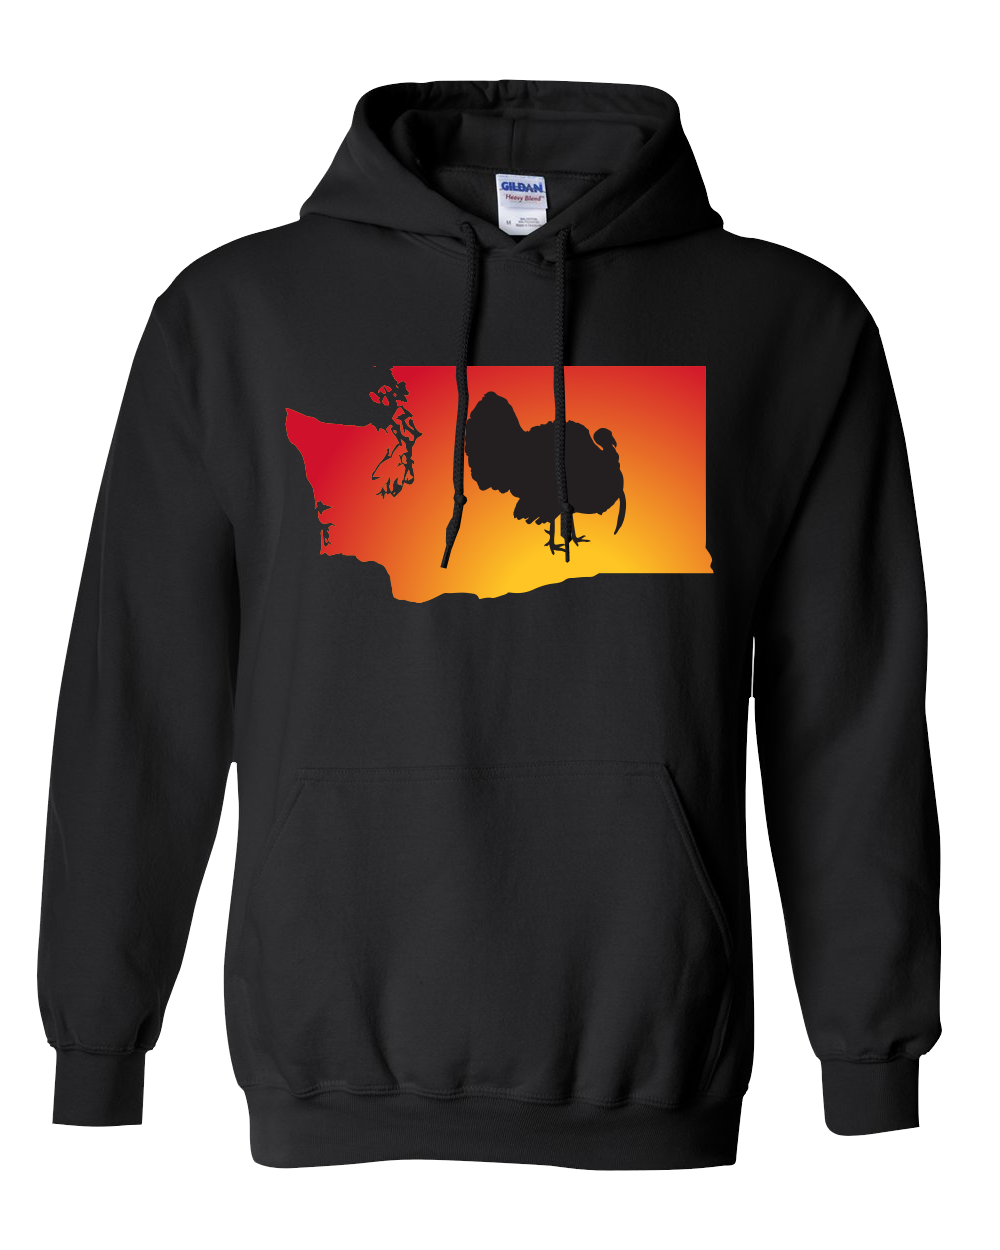 Pullover Hooded Sweatshirt Washington Black Turkey Vibrant Design High Quality Tight Knit Ring Spun Low Maintenance Cotton Printed With The Newest Available Color Transfer Technology